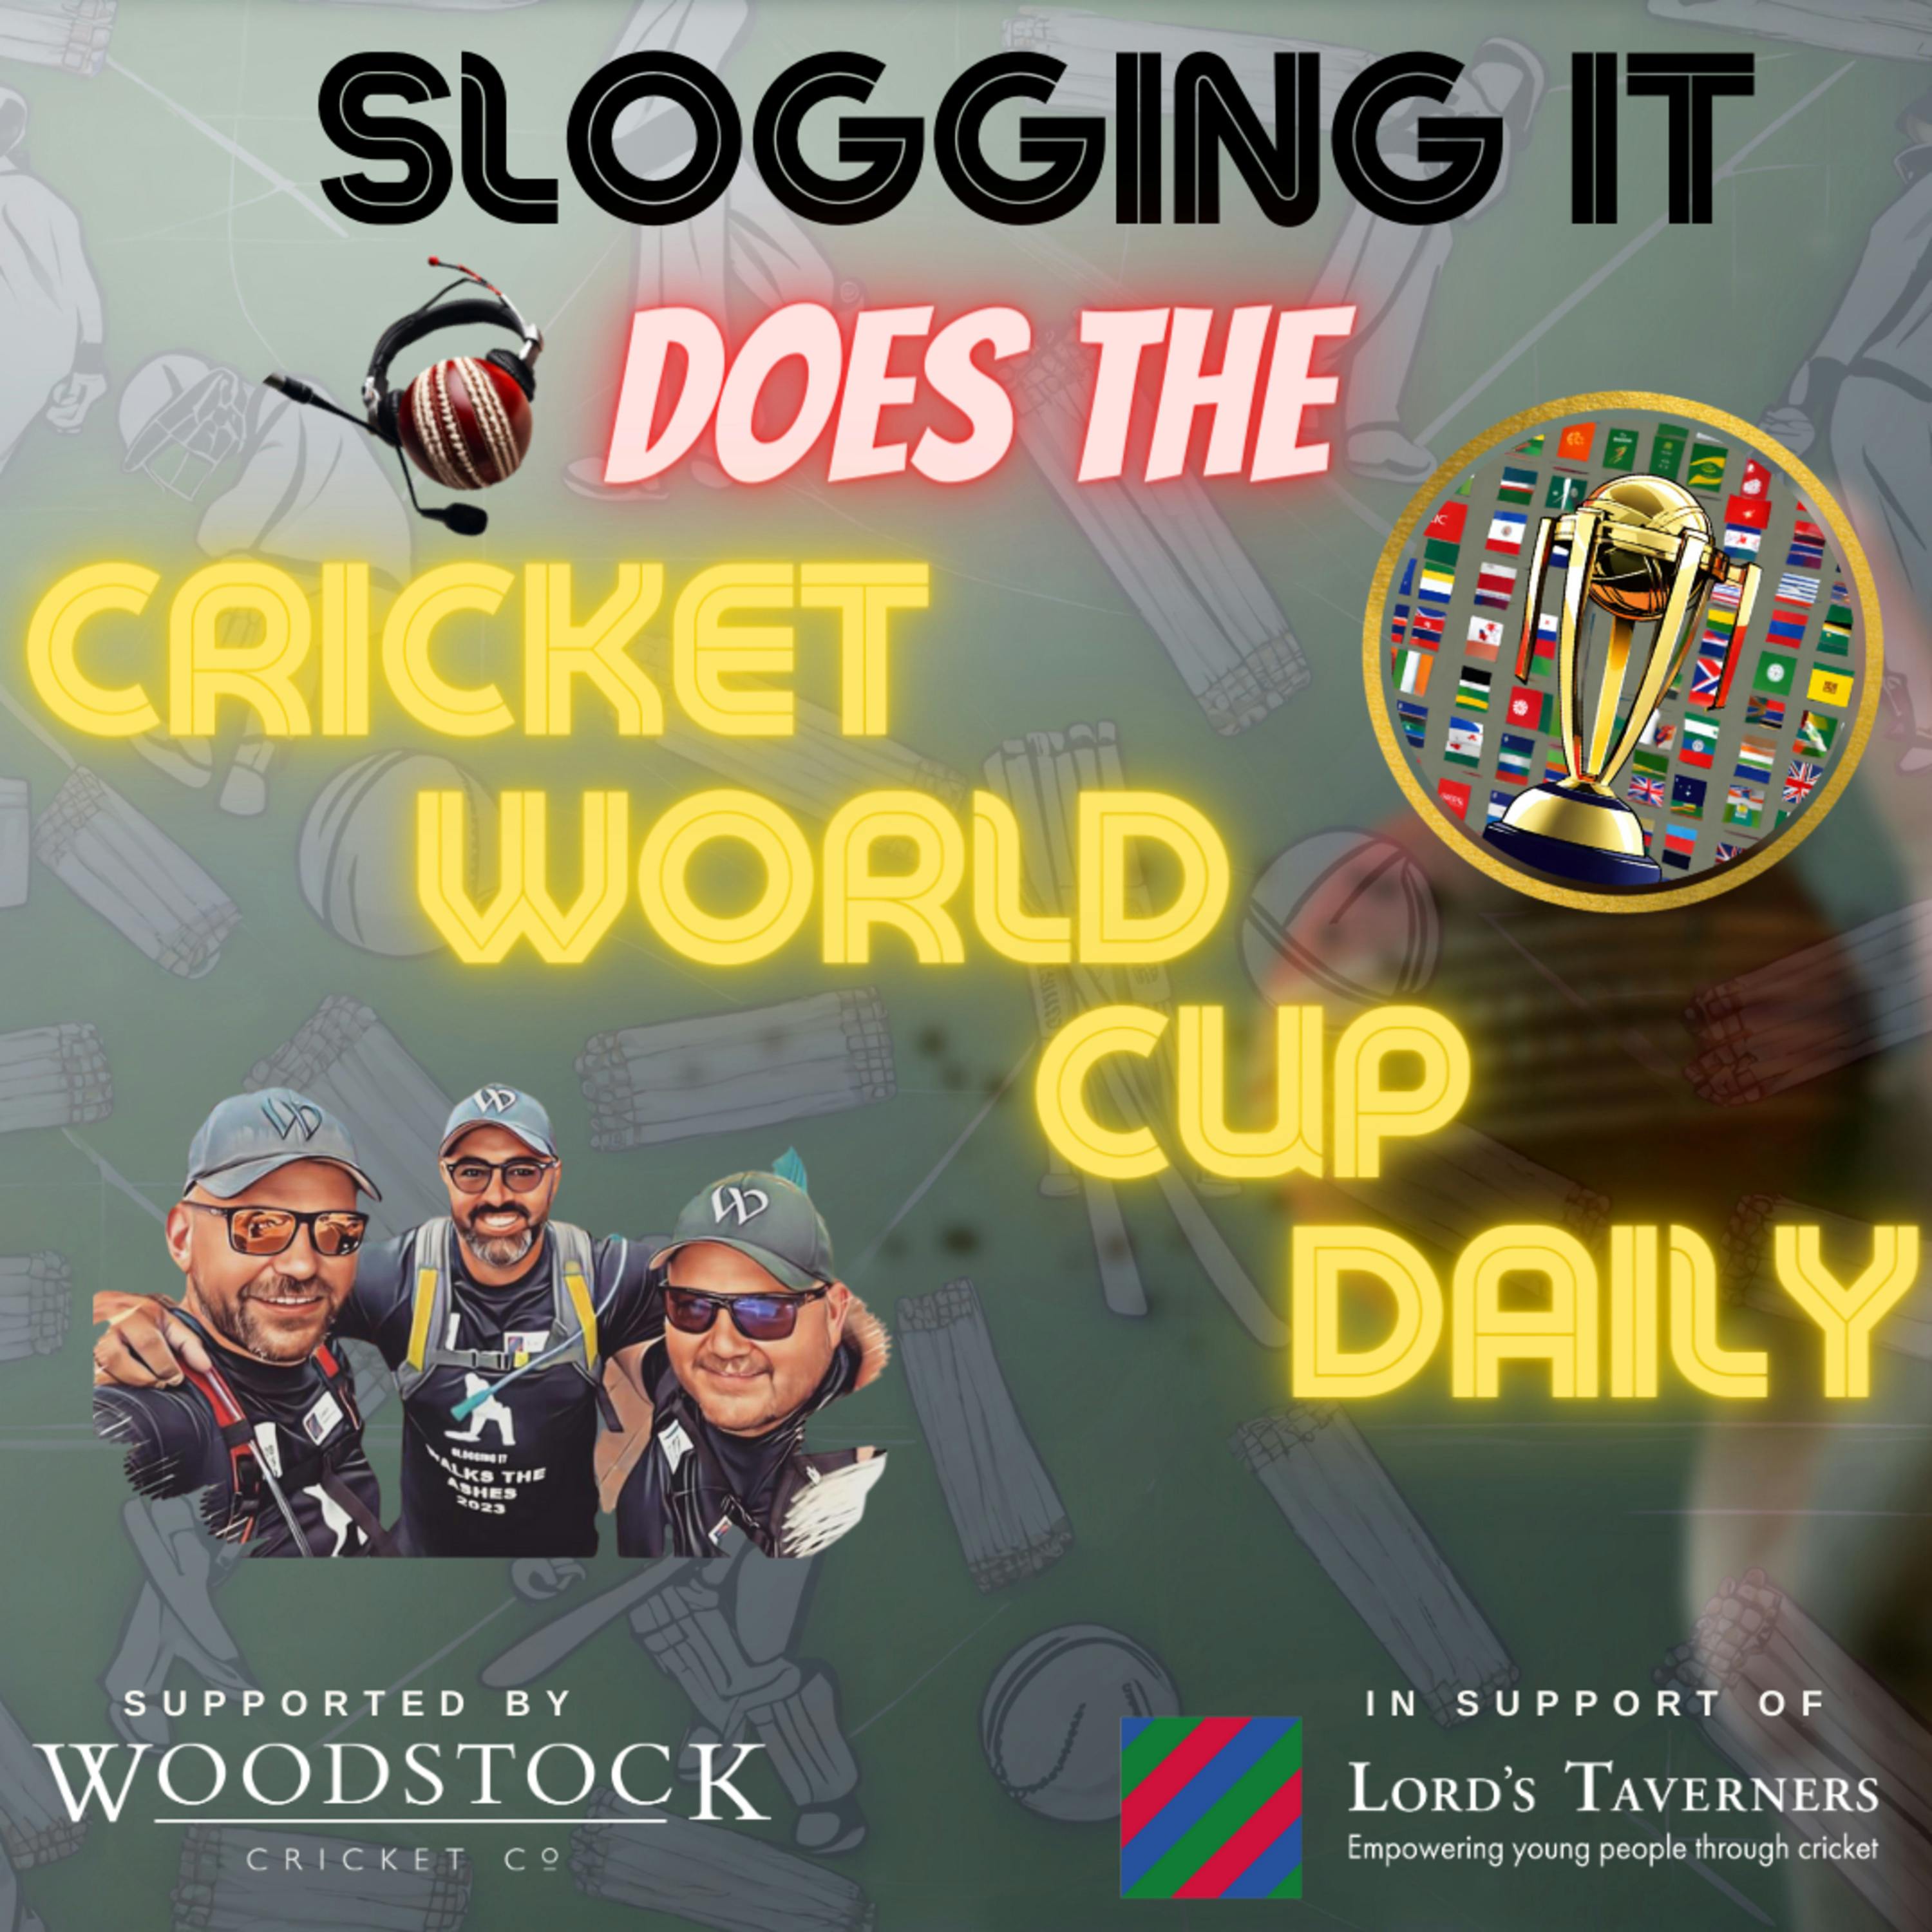 CWCD Day 3 - Cricket Chaos: South Africa's Triple Century and the Art of Fake Crowd Noise?